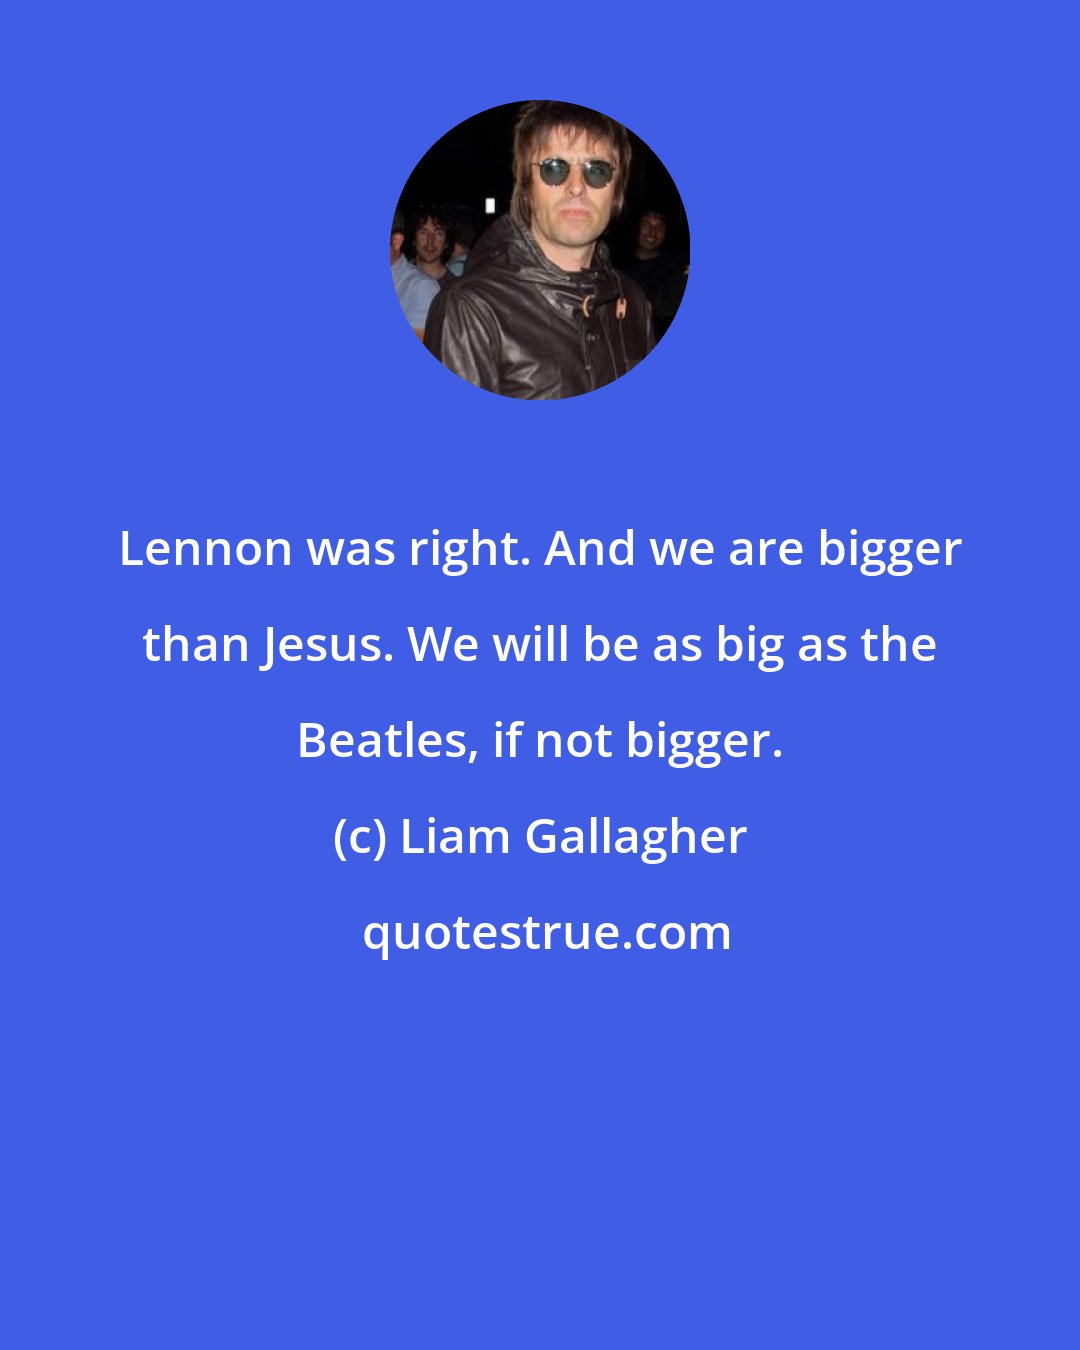 Liam Gallagher: Lennon was right. And we are bigger than Jesus. We will be as big as the Beatles, if not bigger.